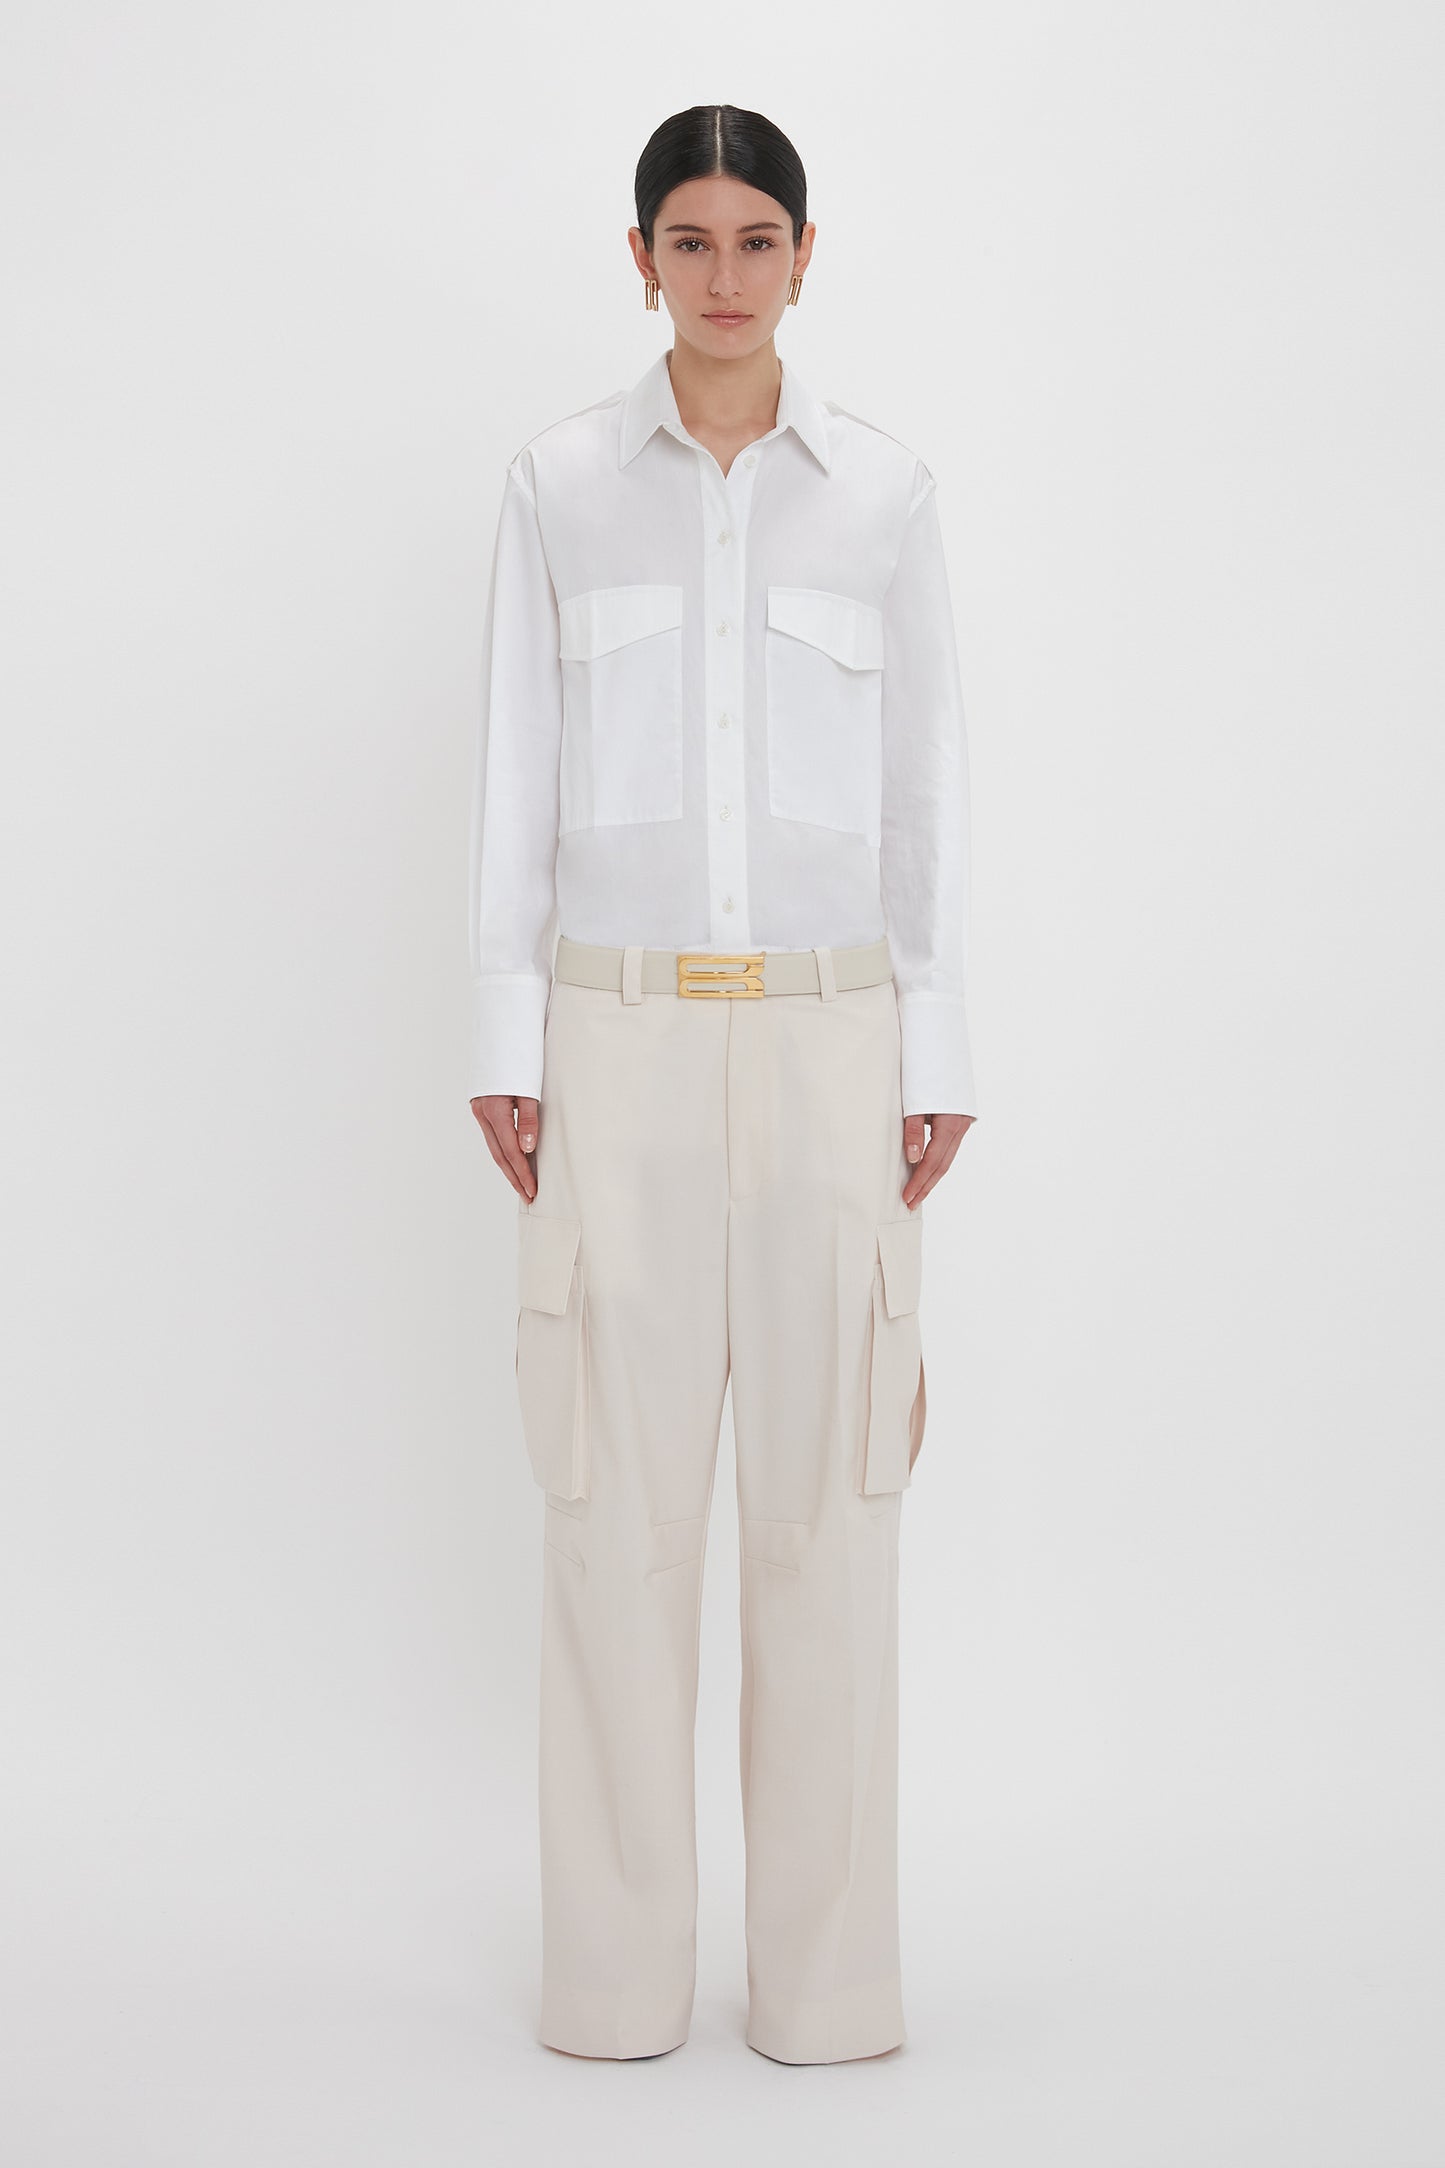 A person stands against a plain white background wearing an Oversized Pocket Shirt In White by Victoria Beckham made from organic cotton and beige cargo pants.